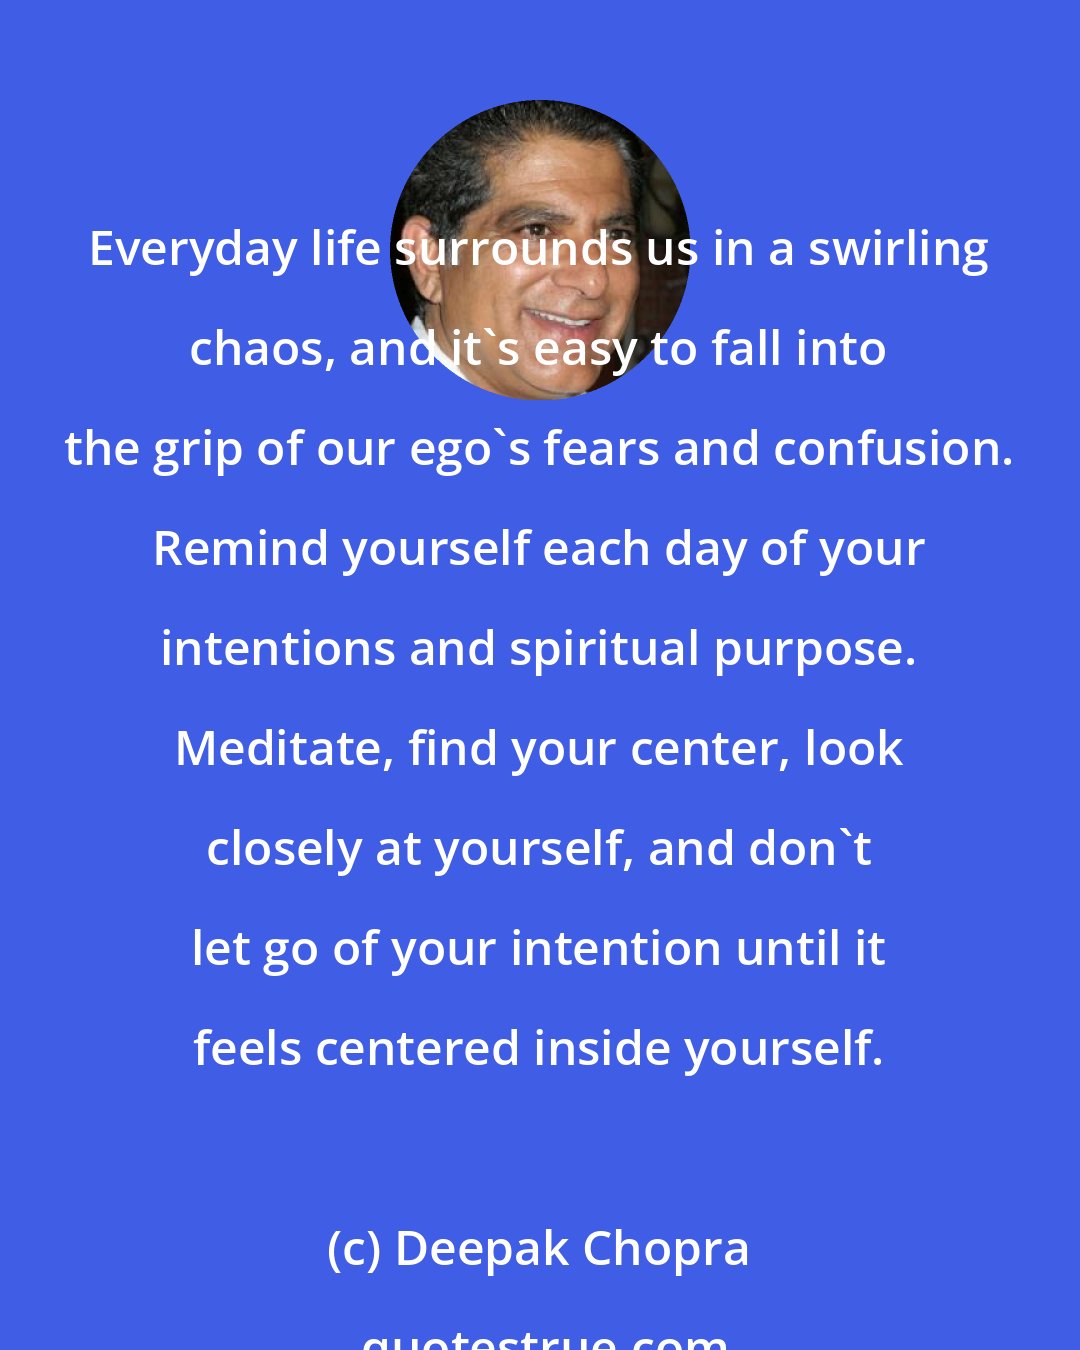 Deepak Chopra: Everyday life surrounds us in a swirling chaos, and it's easy to fall into the grip of our ego's fears and confusion. Remind yourself each day of your intentions and spiritual purpose. Meditate, find your center, look closely at yourself, and don't let go of your intention until it feels centered inside yourself.